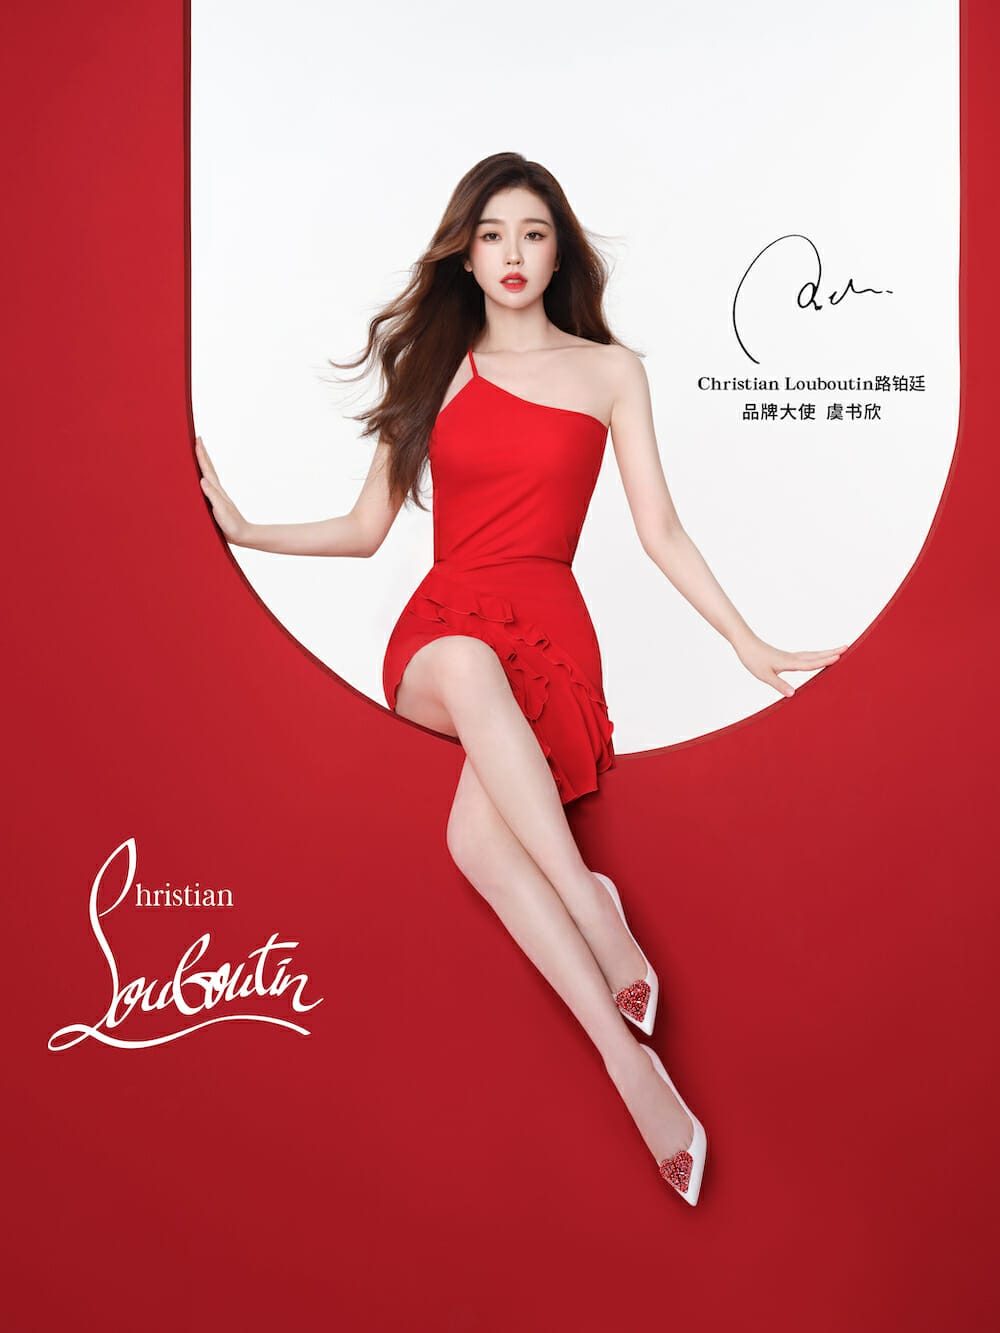 Esther Yu Christian Louboutin campaign image